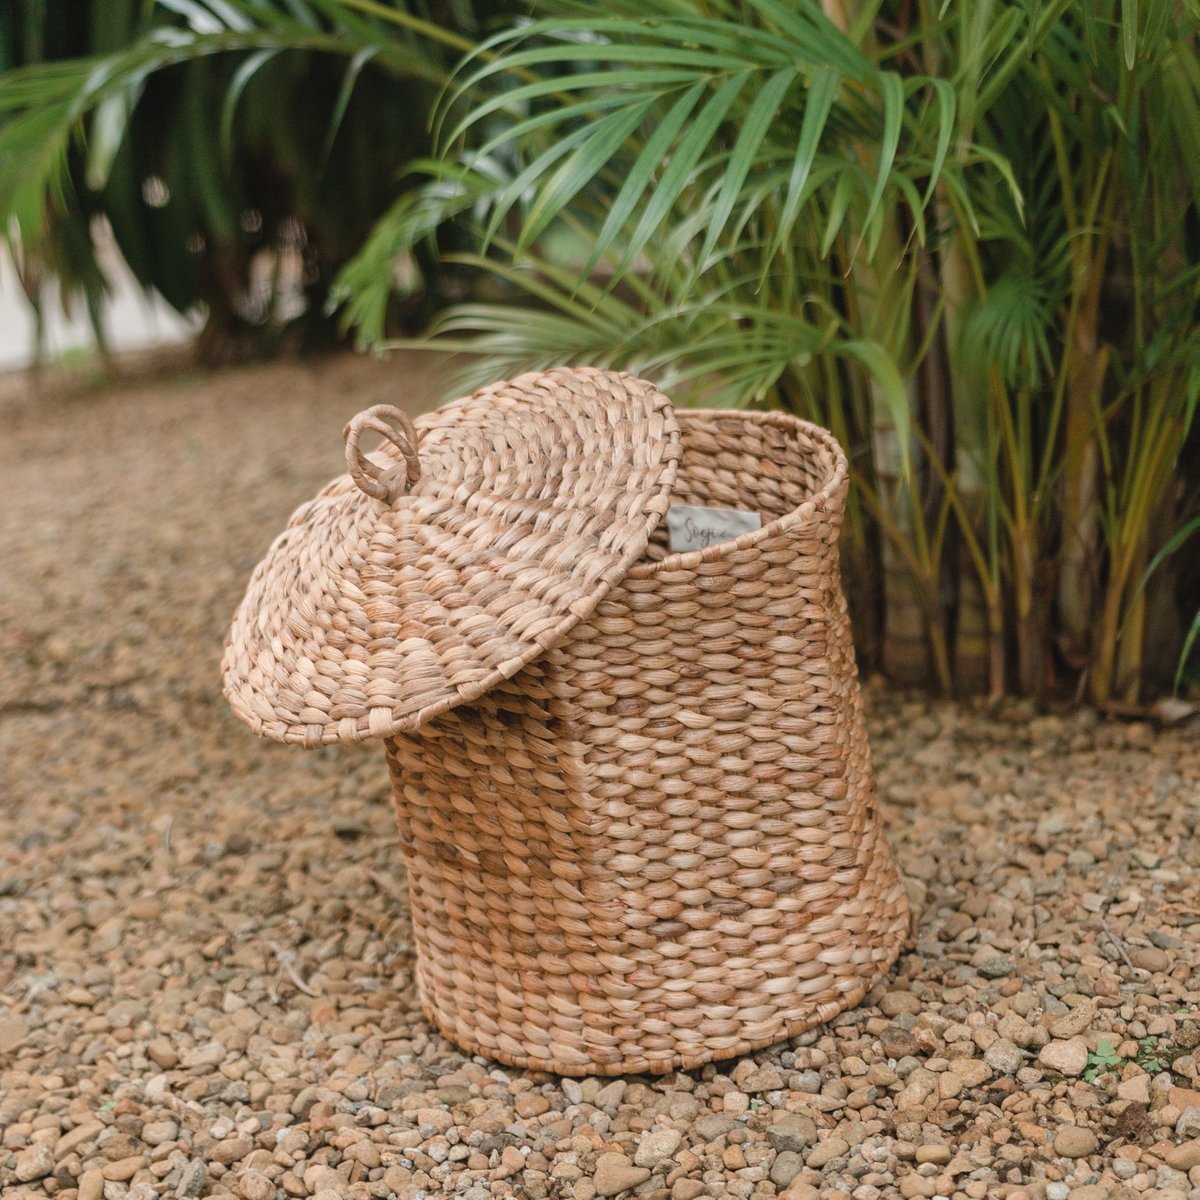 Laundry Basket with Lid GARUT made from Water Hyacinth (3 sizes)